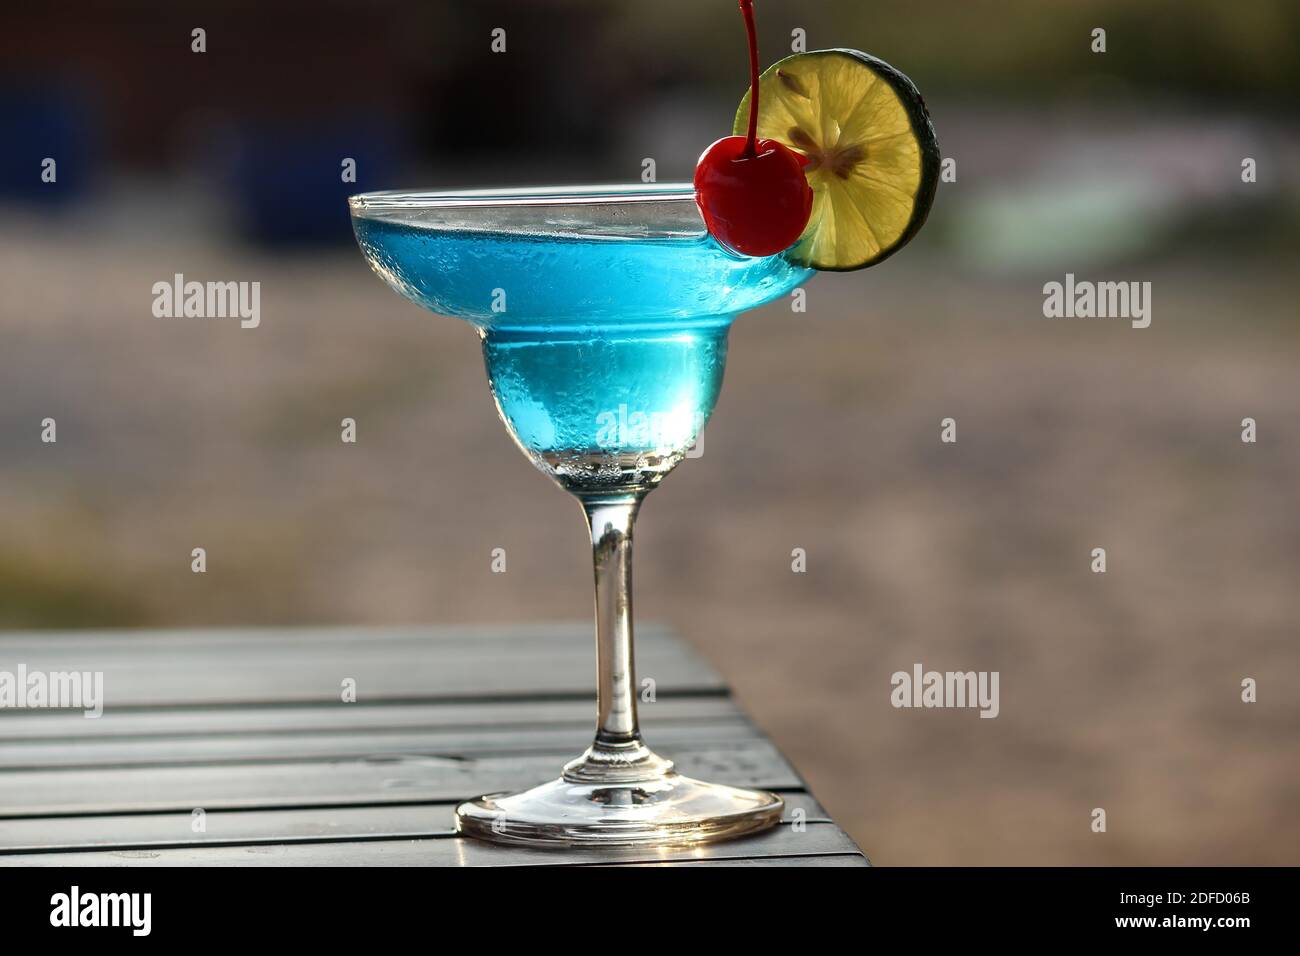 Juice that may contain alcohol to add flavor in a clear, round glass with a thin slice of kaffir lime garnish with a cherry. Stock Photo